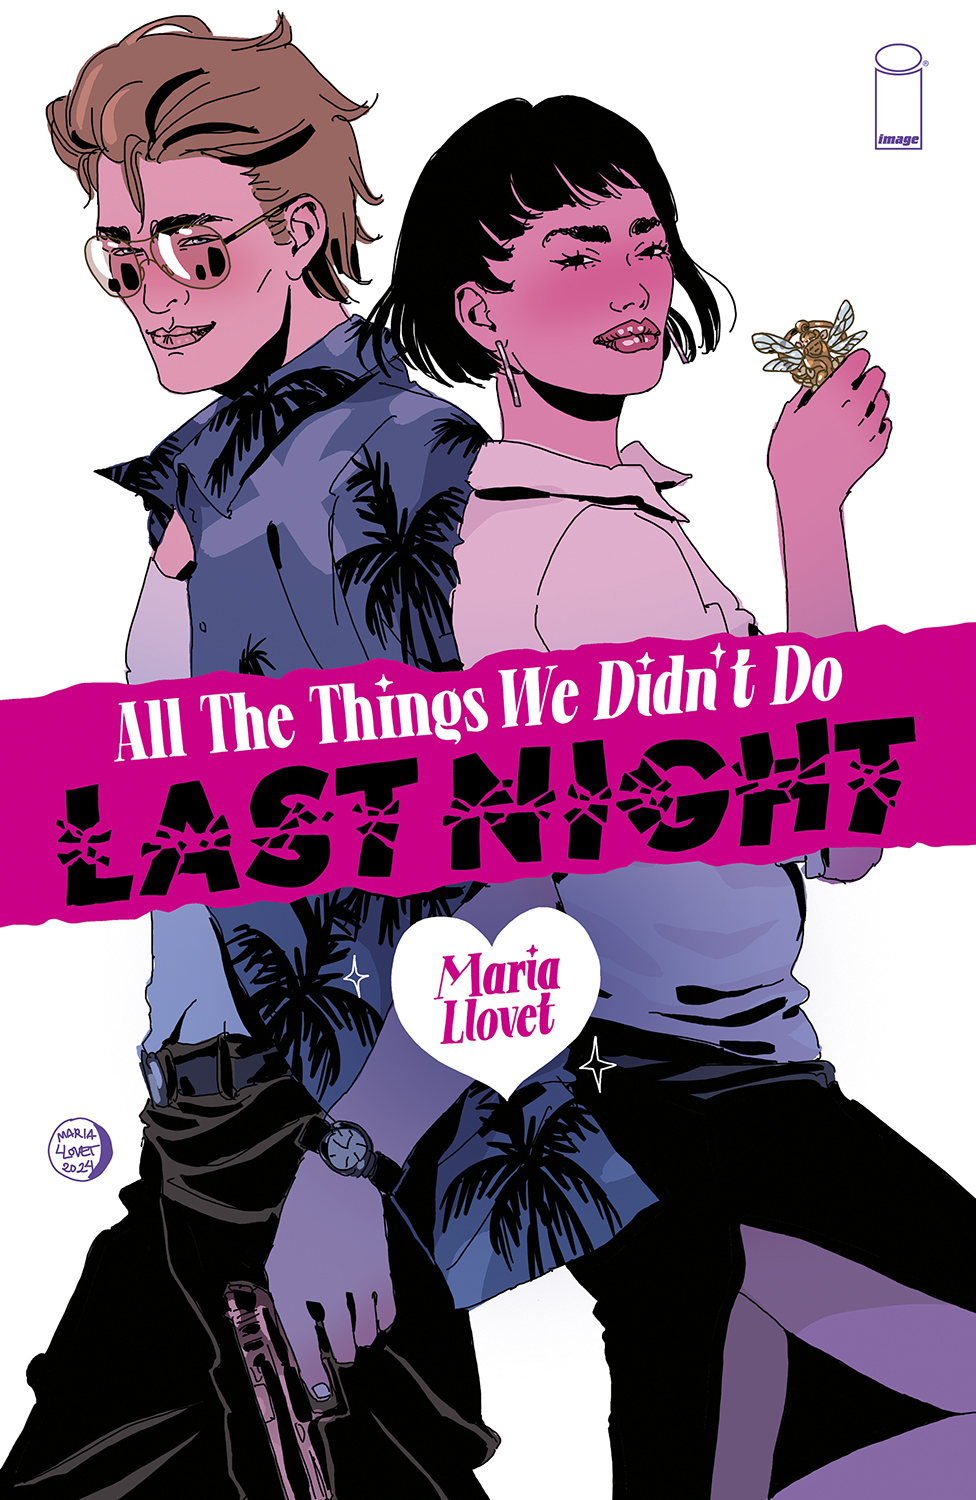 All the Things We Didn't Do Last Night (One Shot) Cover A Maria Llovet (Mature)